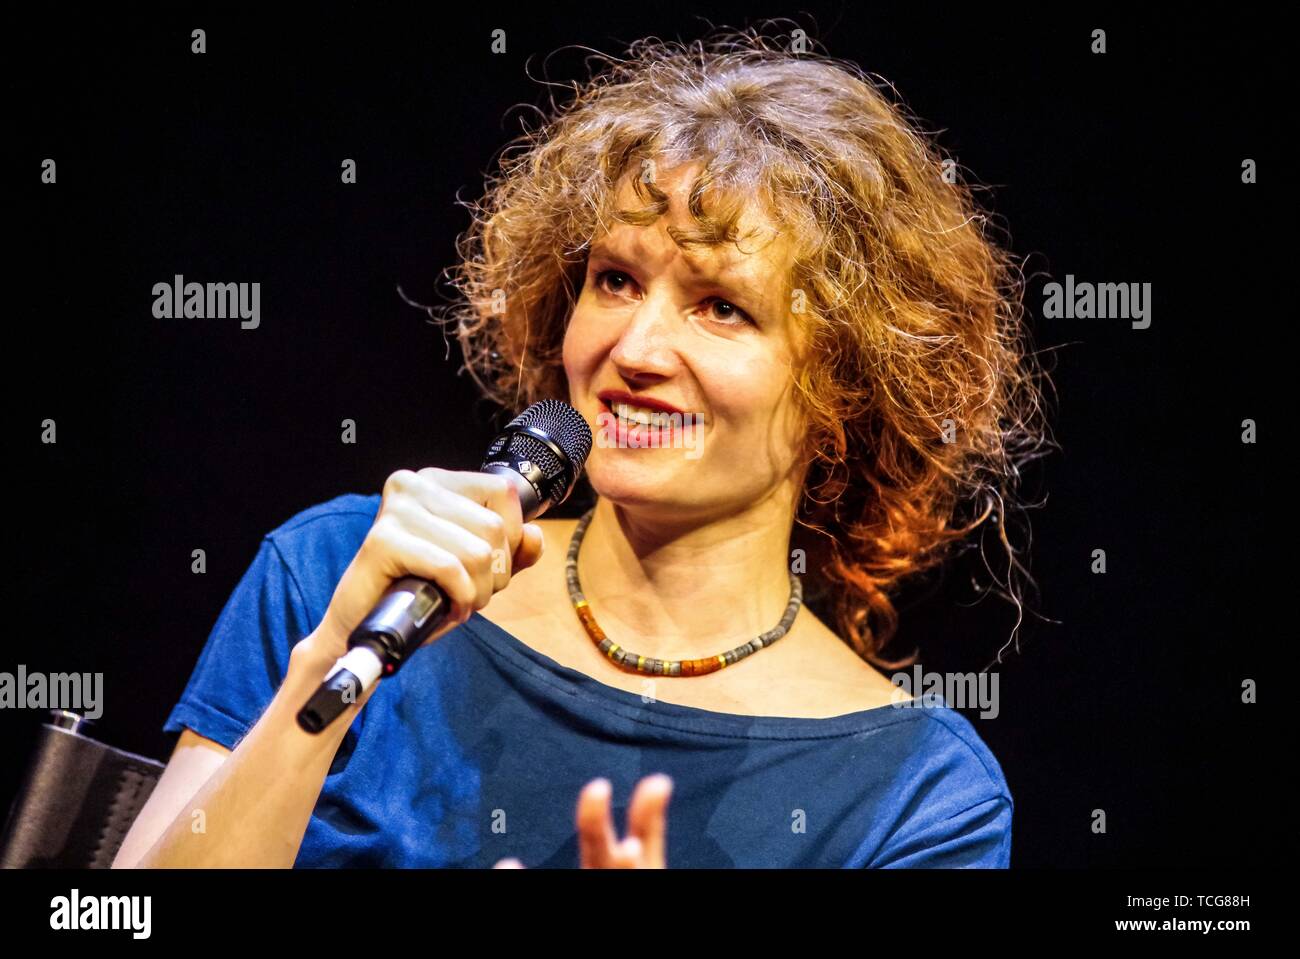 Munich, Bavaria, Germany. 7th June, 2019. Prominent gynecologist Dr. KRISTINA HAENEL spoke at a panel discussion with Munich abortion doctor FRIEDRICH STAPF, activist SARA DIEHL and PENELOPE KEMEKENIDOU at the Muenchen Kammerspiele with about Germany's controversial Nazi-era 219a law that forbids physicians from advertising counseling services and providing information for abortion. As of late, anti-abortion groups have successfully 'weaponized'' the law in order to prosecute physicians such as Dr. Haenel who was fined some 6,000 Euros. In addition, anti-abortion groups hold regular dem Stock Photo